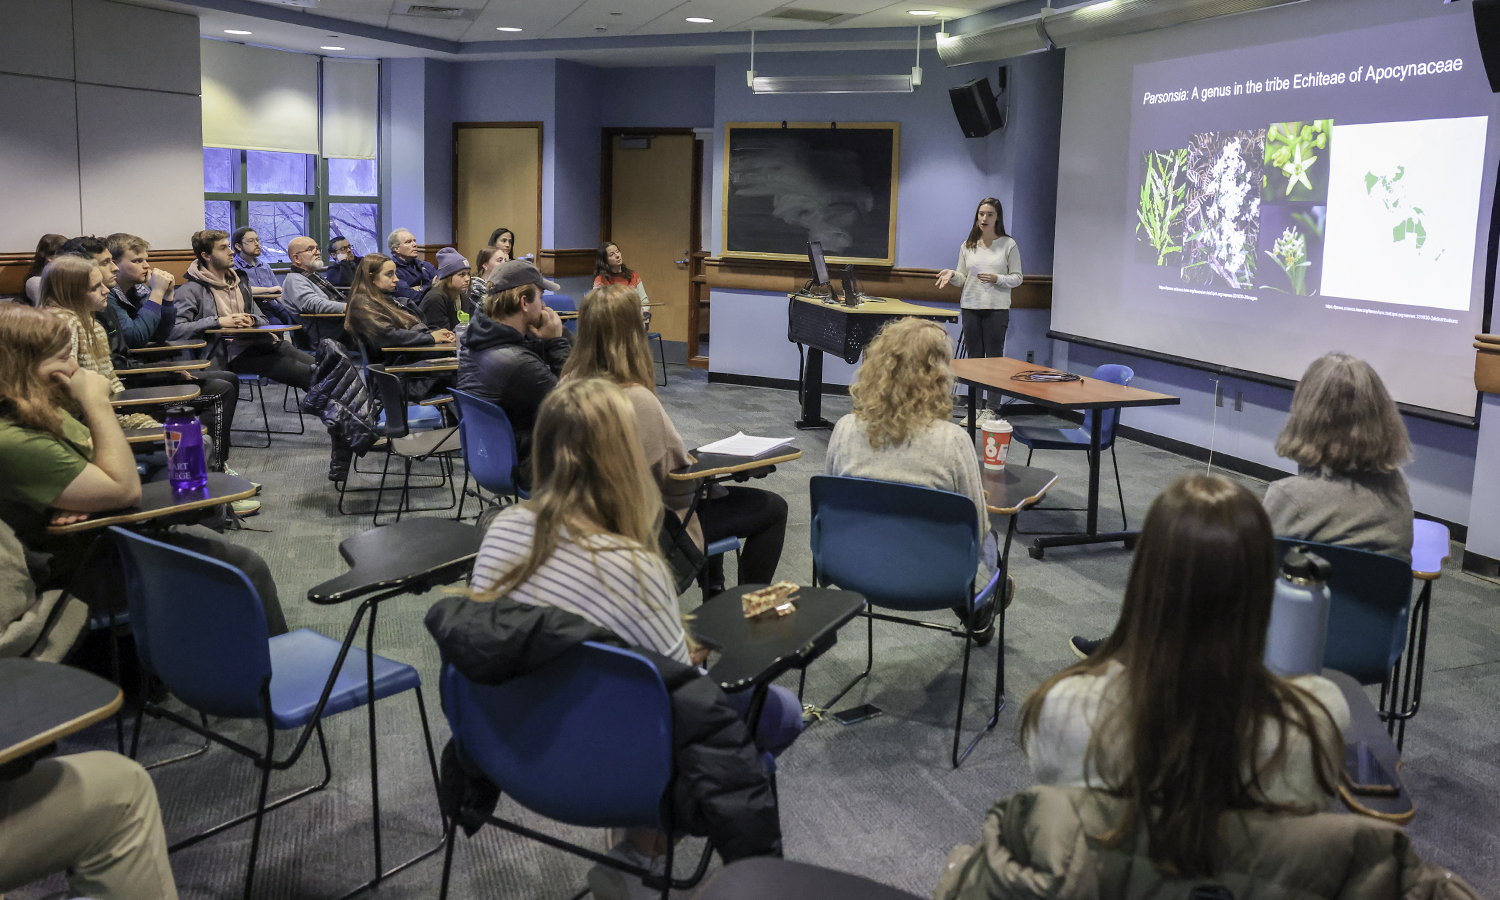 Erika Sipos '23 discusses her research “Parsonsia: A genus in the tribe Echiteae of Apocynaceae” during the semester-end Biology Department presentations.